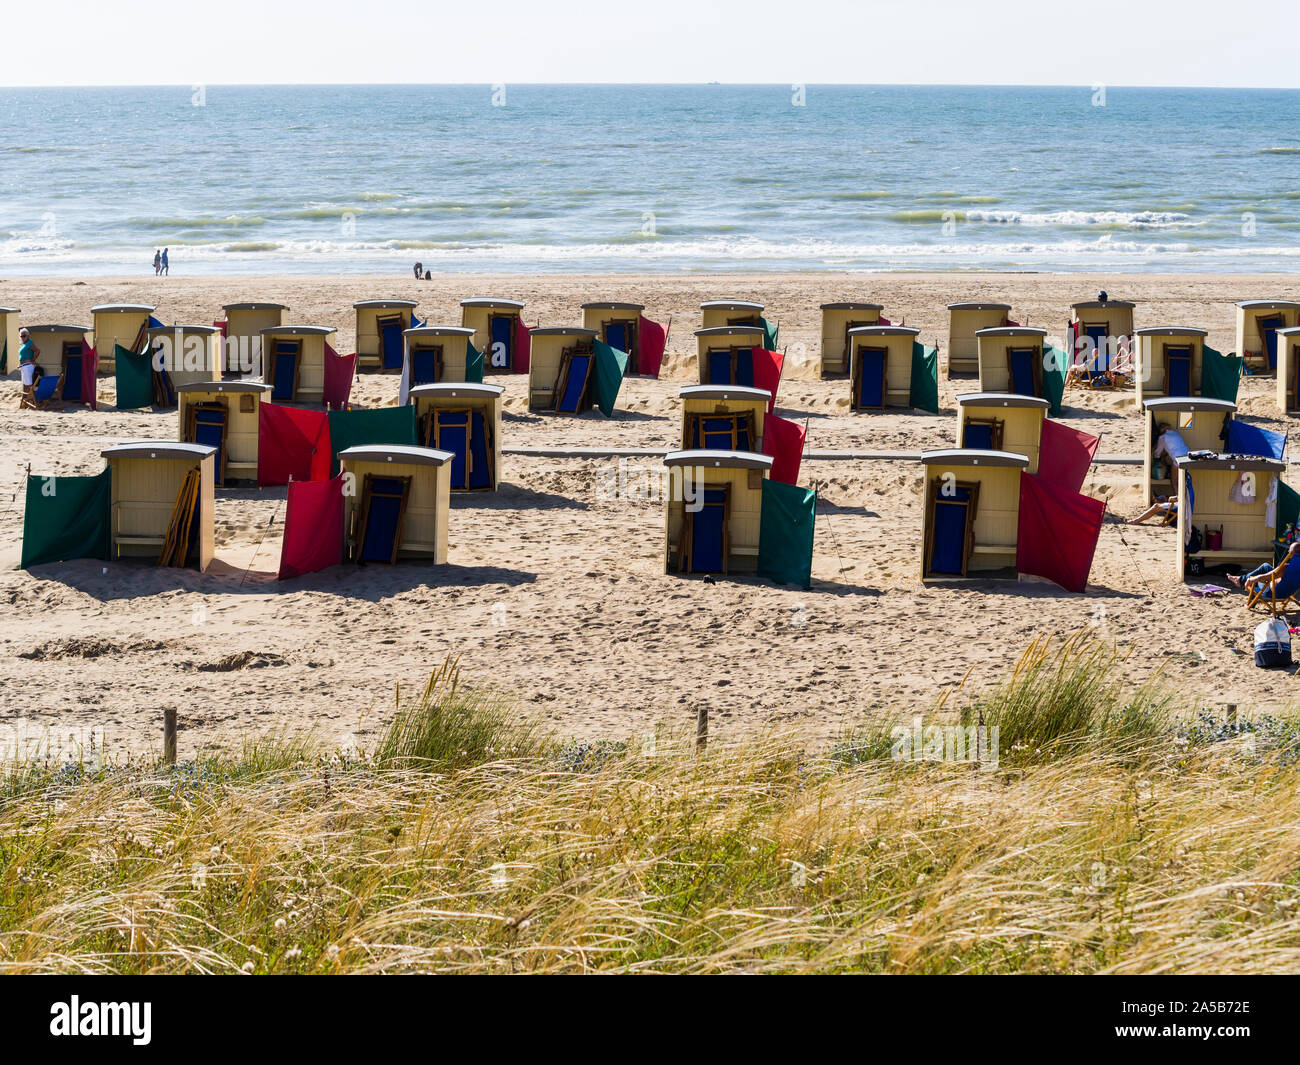 Beach buts on a summer day at the North Sea beach at Domburg, Netherlands. Stock Photo